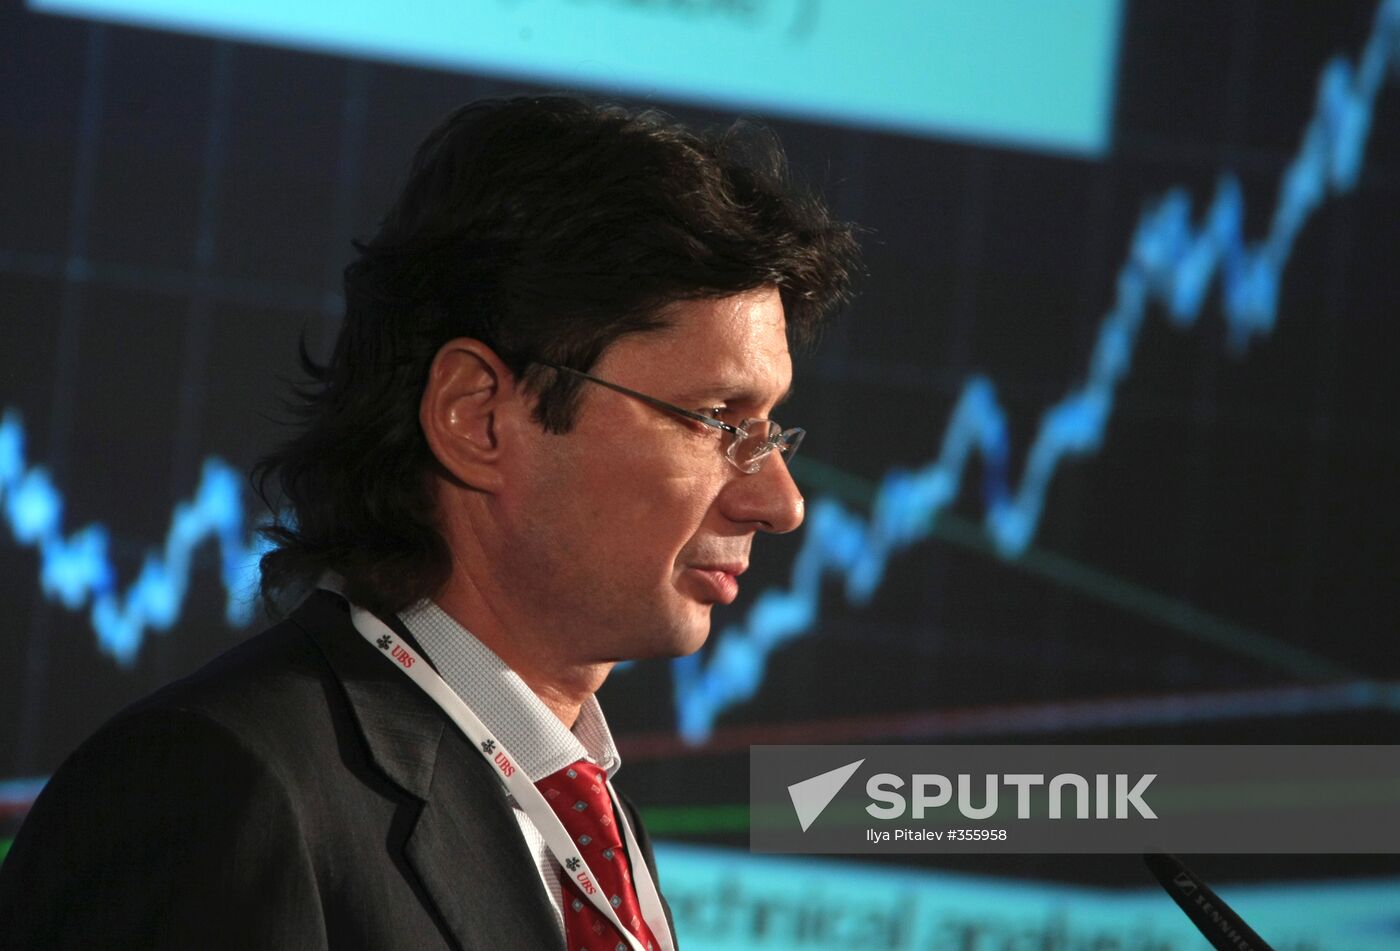 14th UBS investment conference in Moscow